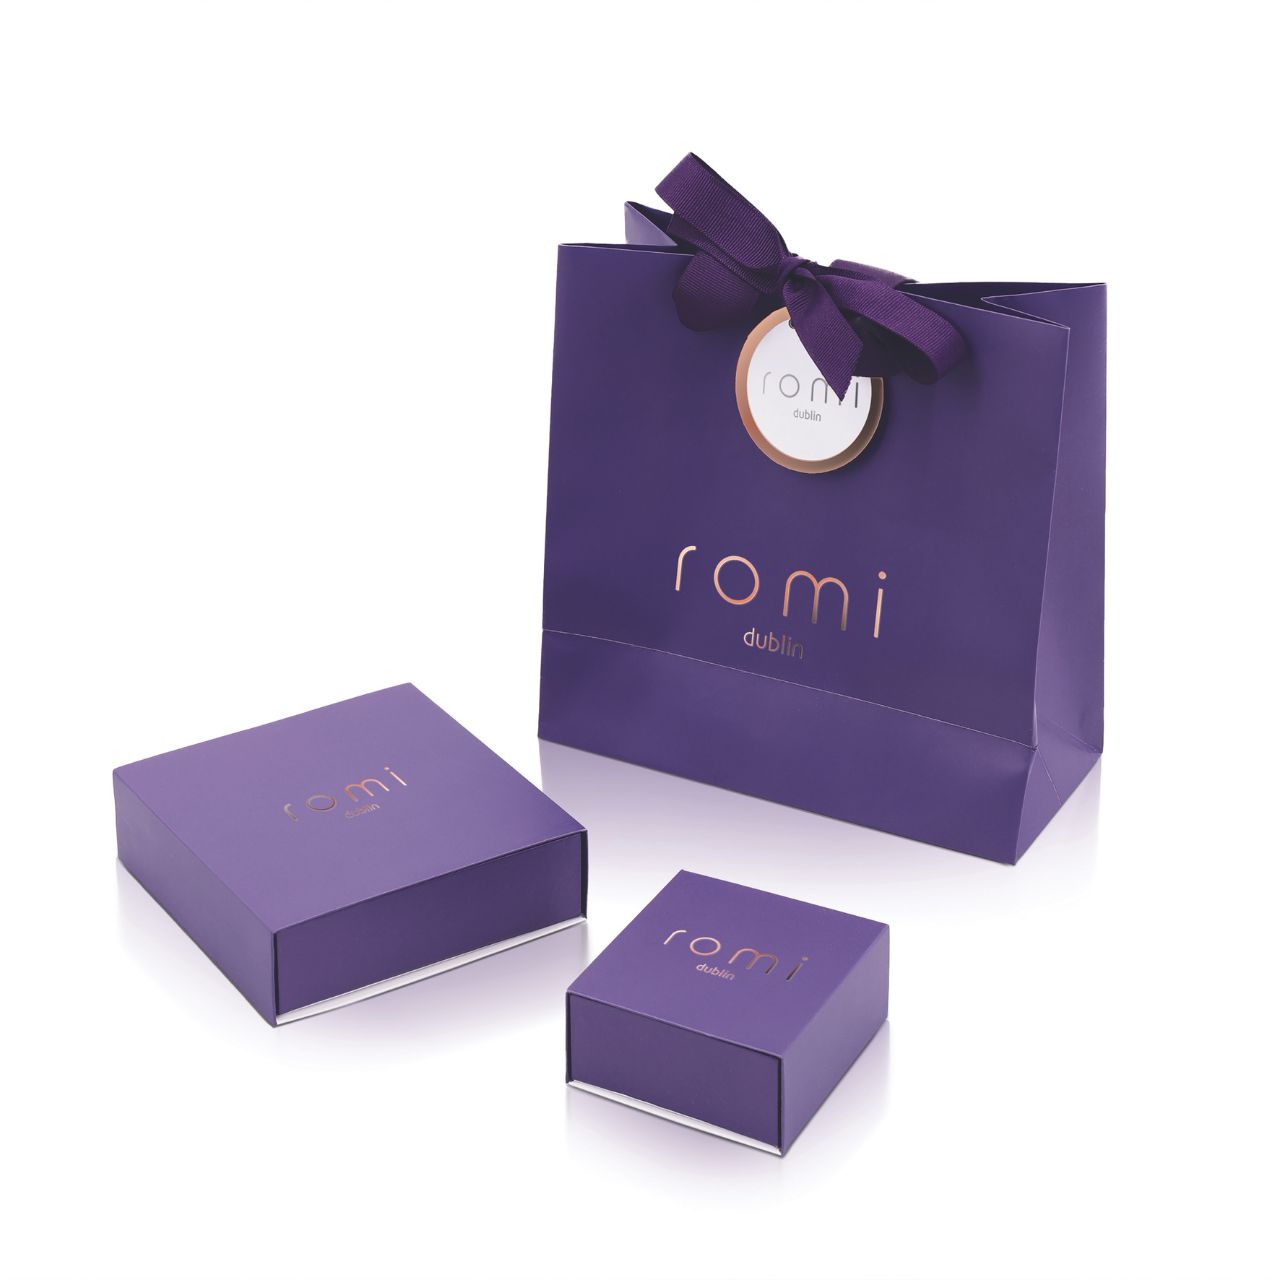 Romi Dublin Silver Circle Chain Bracelet  This easy-to-wear jewellery collection was inspired by daughter Romi who loves to style and accessorise. An outfit isn’t complete until the perfect pieces of jewellery and accessories have been selected to enhance it.